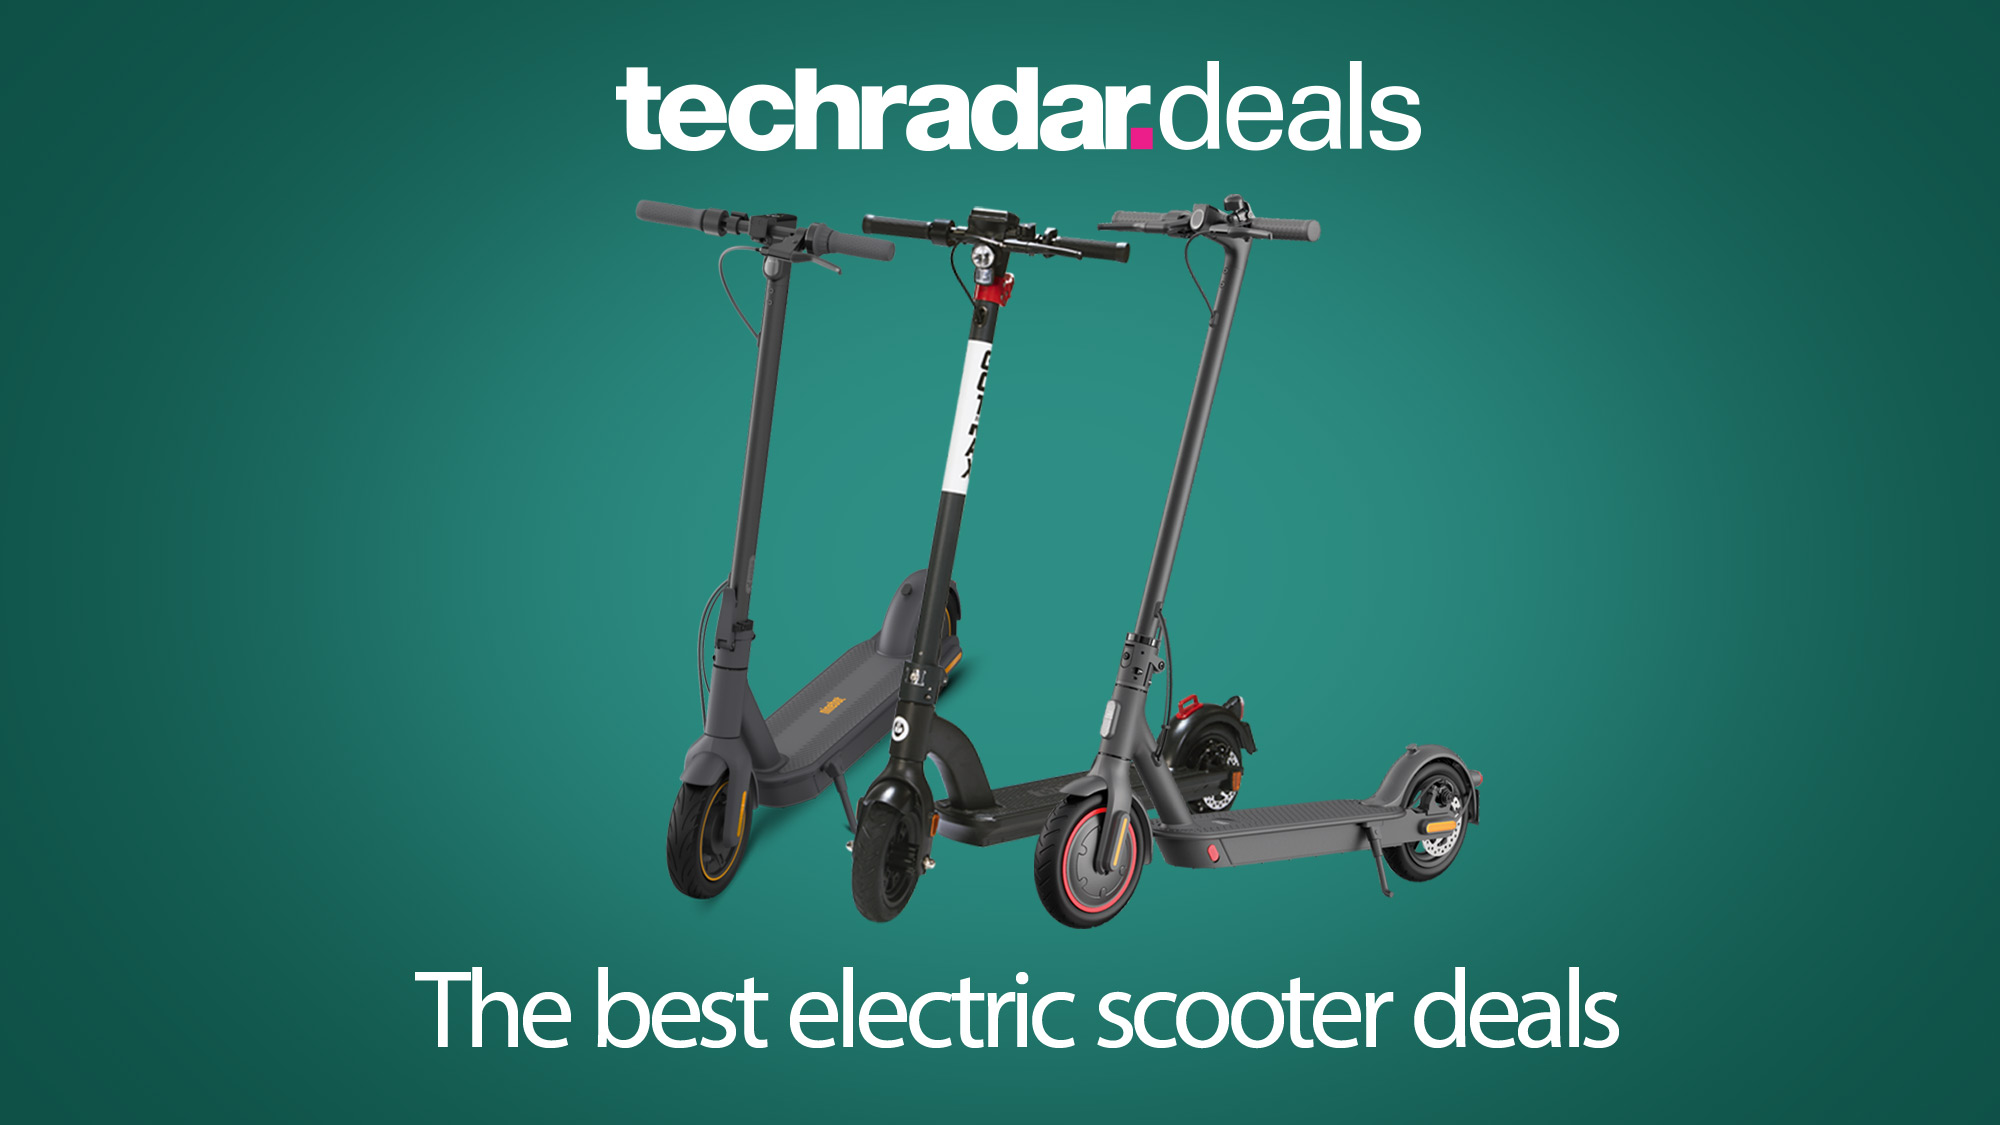 The Cheapest Electric Scooter Deals Prices And Sales In September 21 Techradar